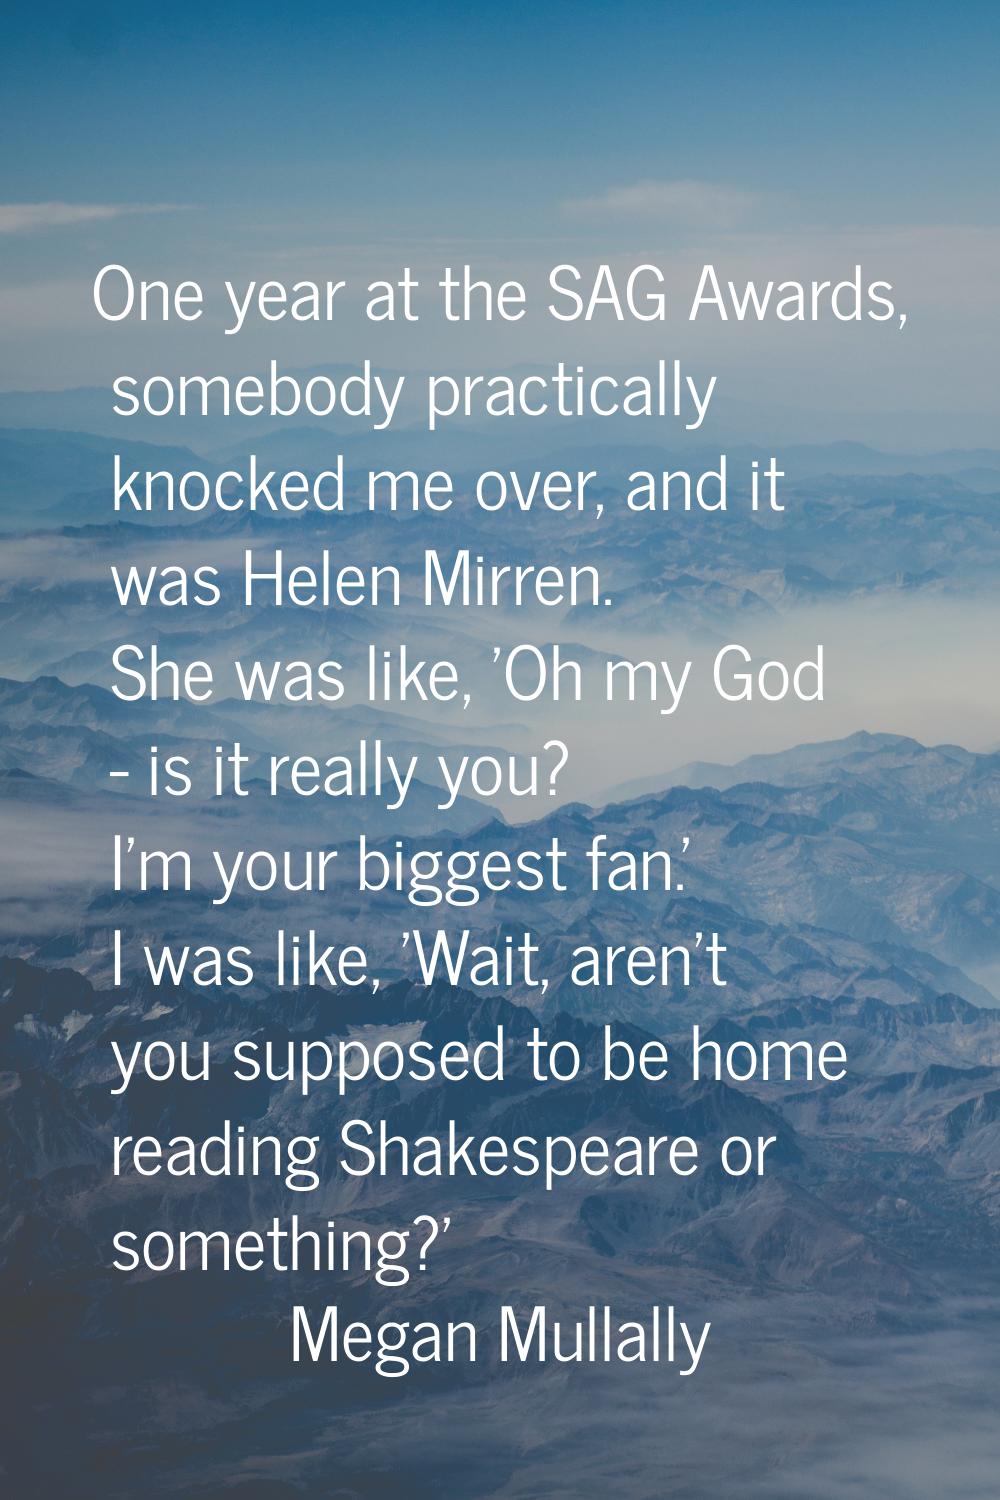 One year at the SAG Awards, somebody practically knocked me over, and it was Helen Mirren. She was 